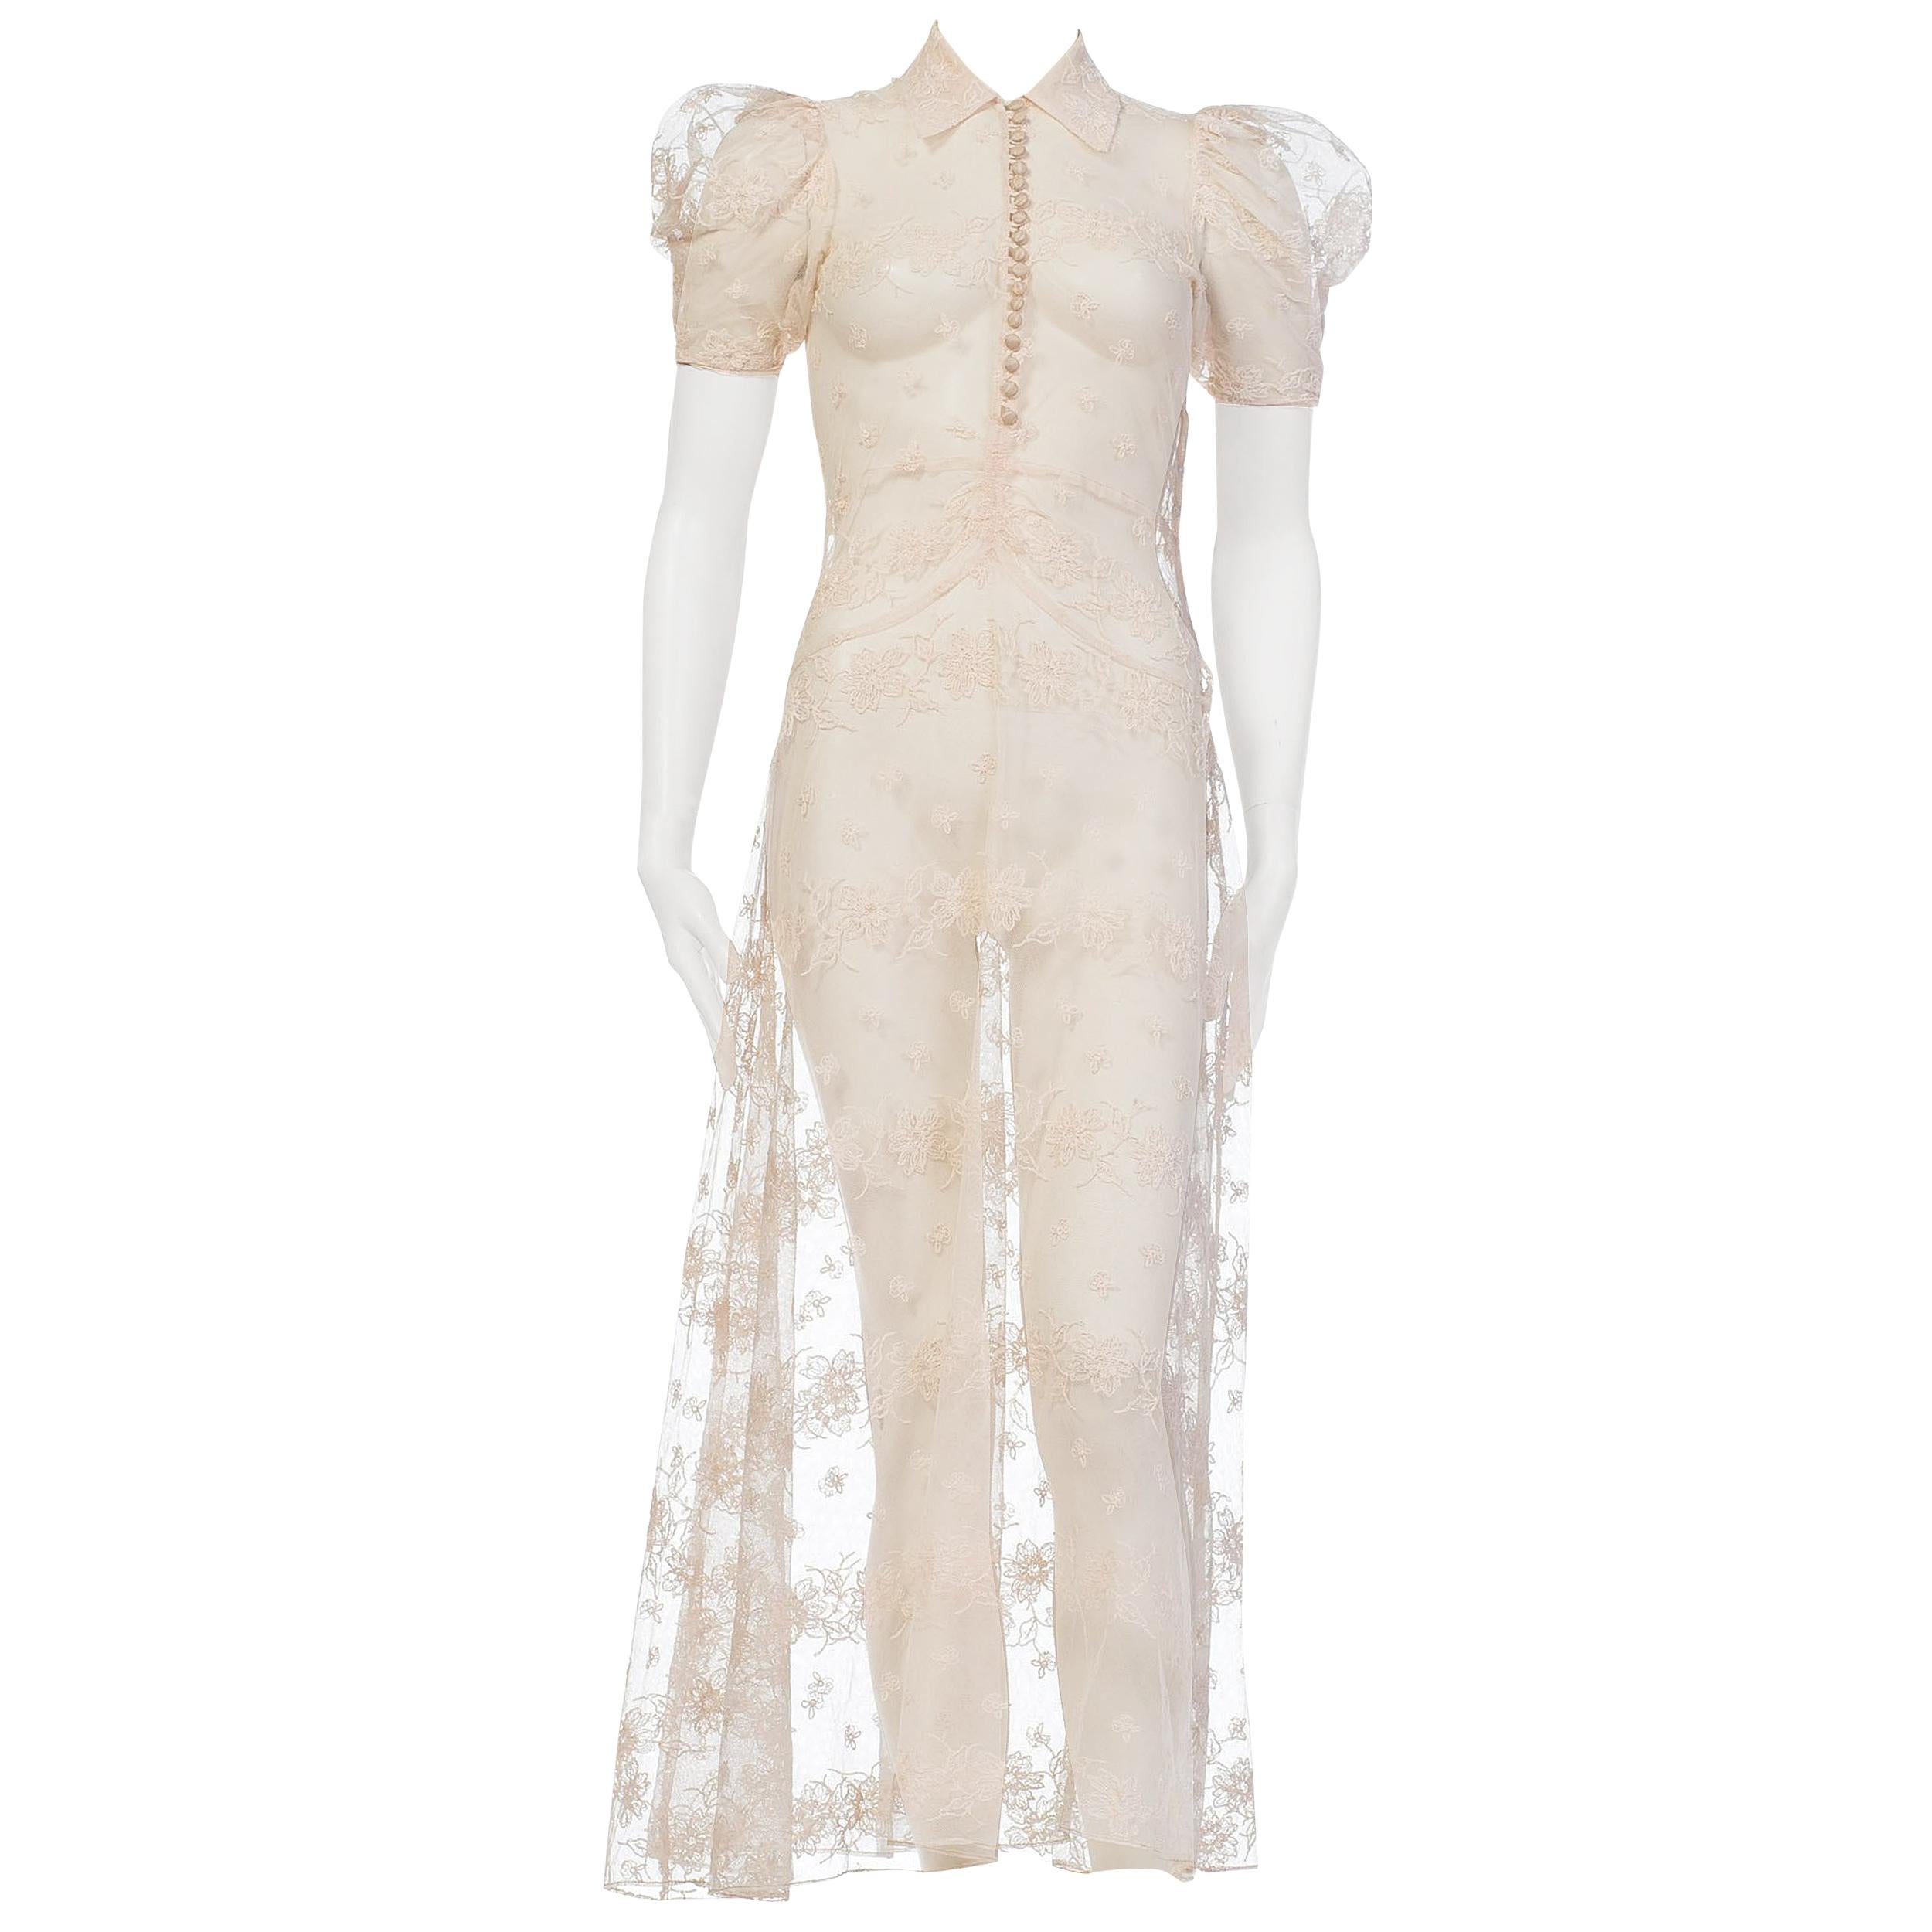 1930s Sheer Lace Net Dress With Floral Embroidery 